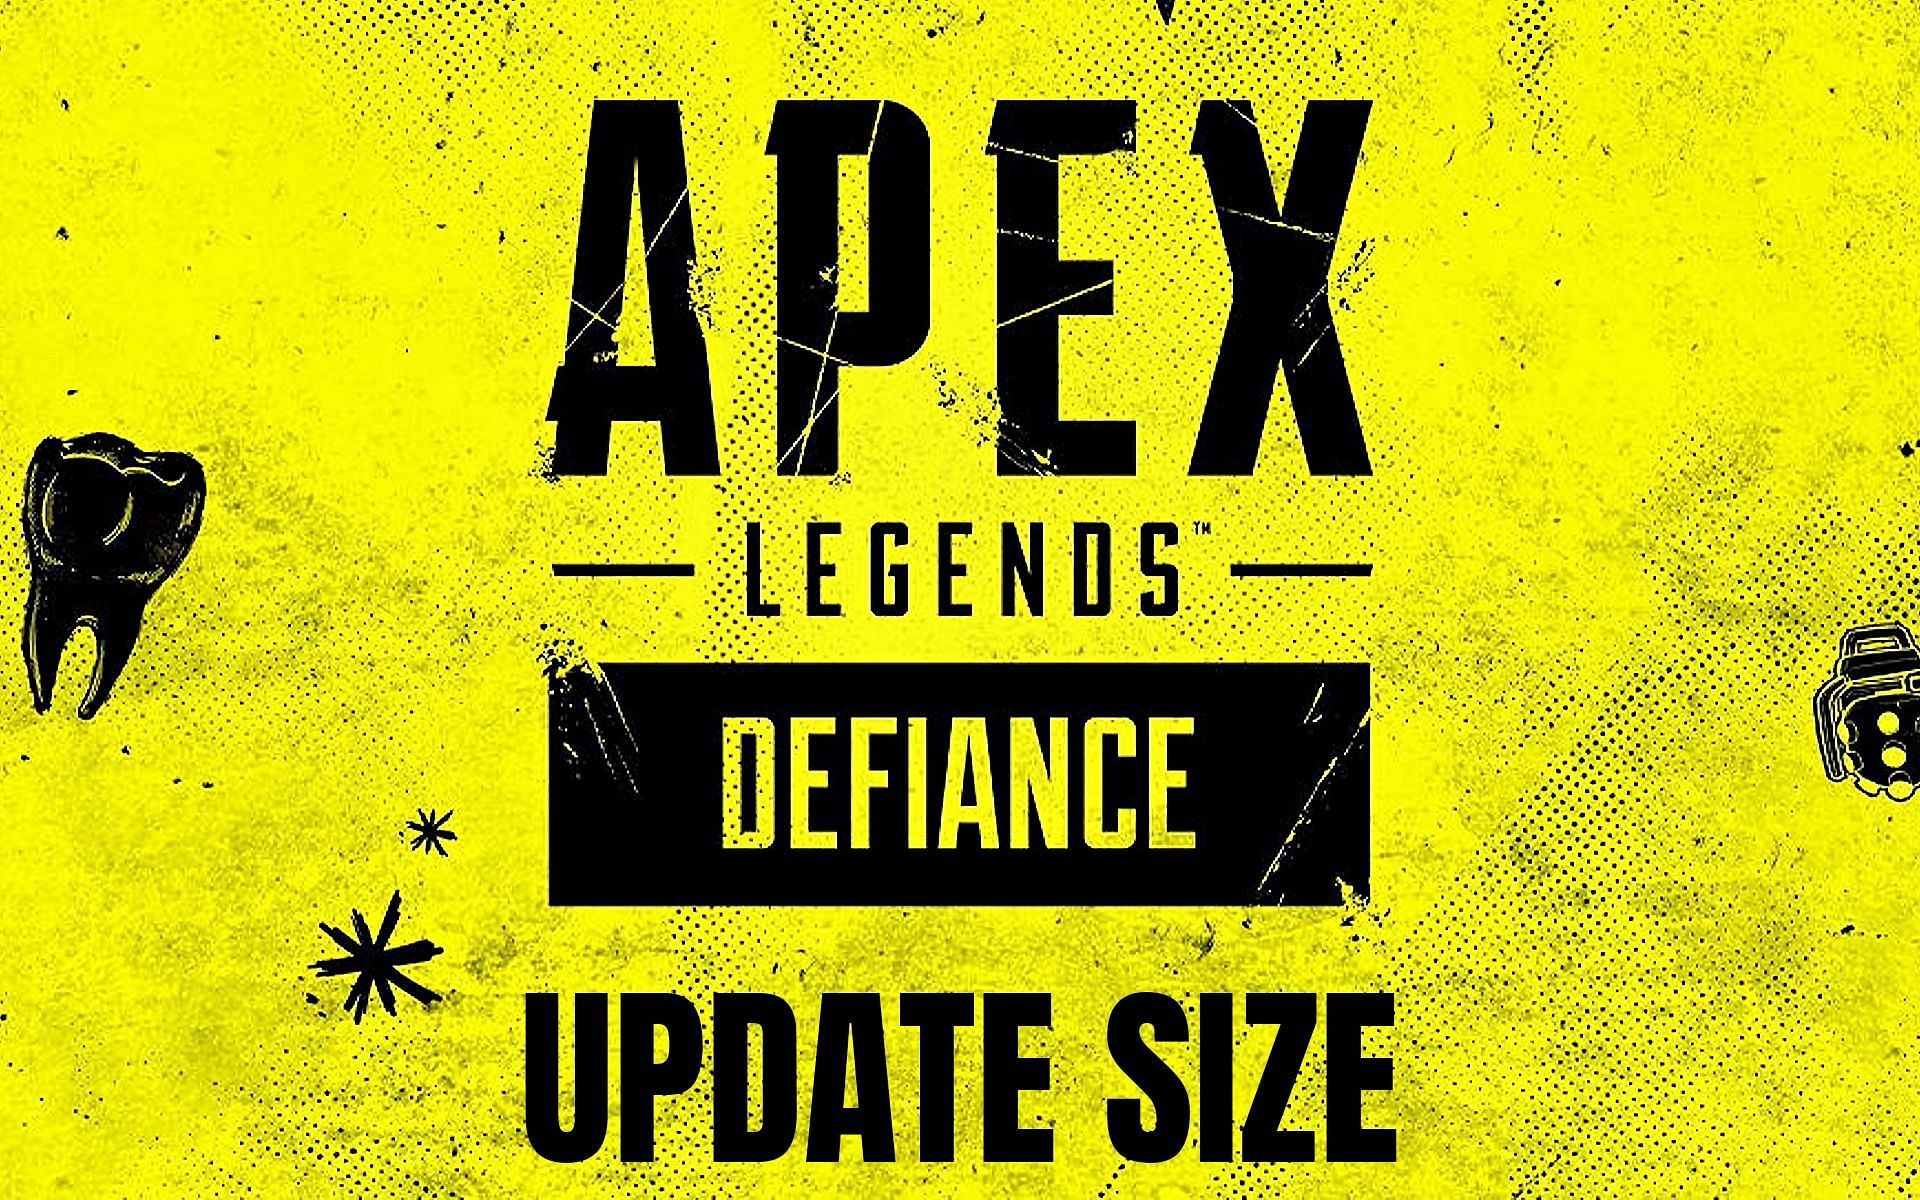 Apex Legends game size: How big is the Steam download?